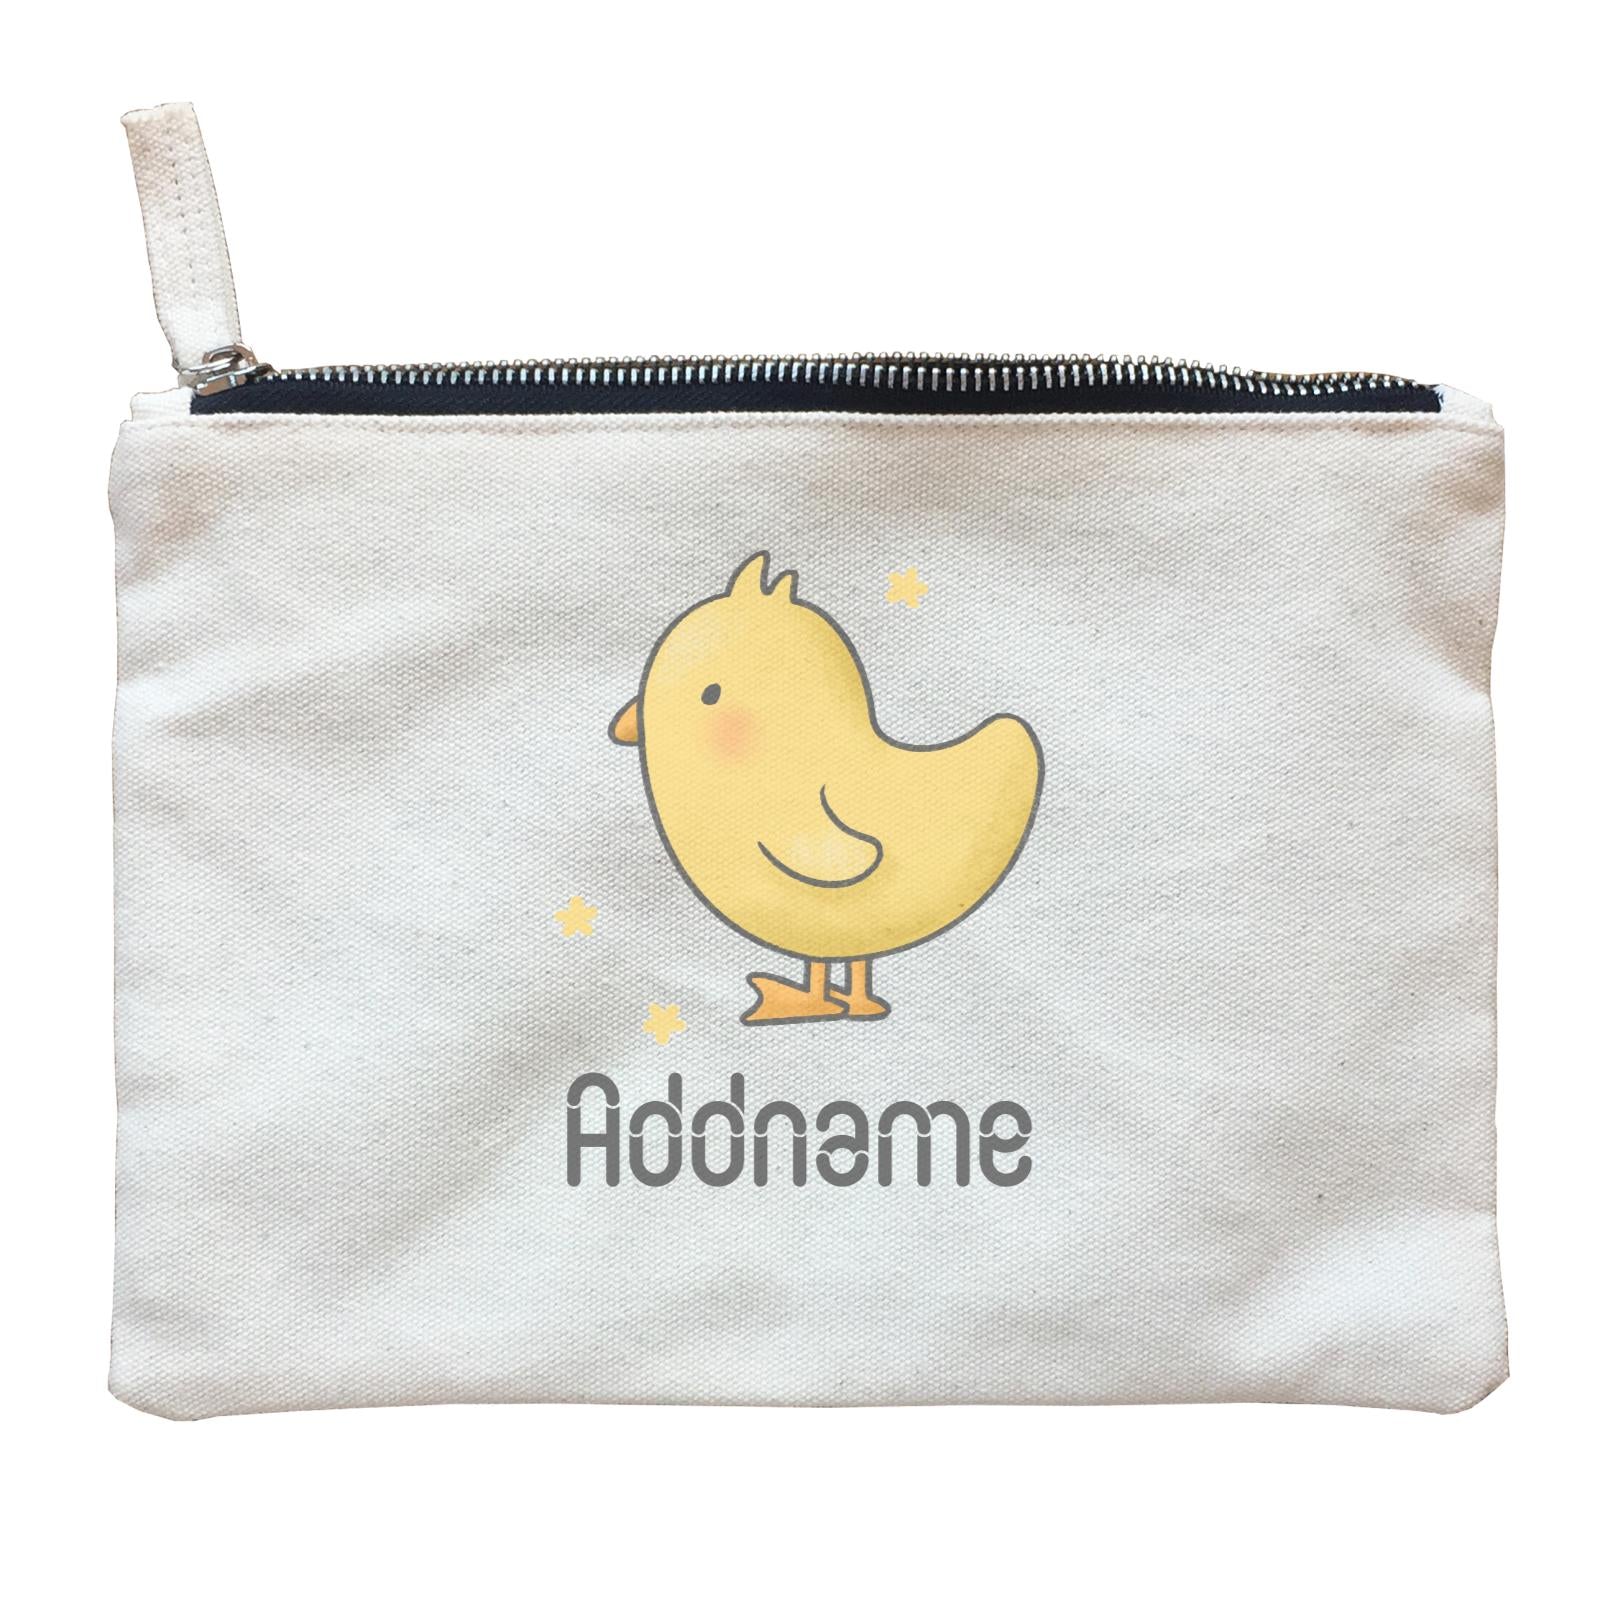 Cute Hand Drawn Style Chick Addname Zipper Pouch